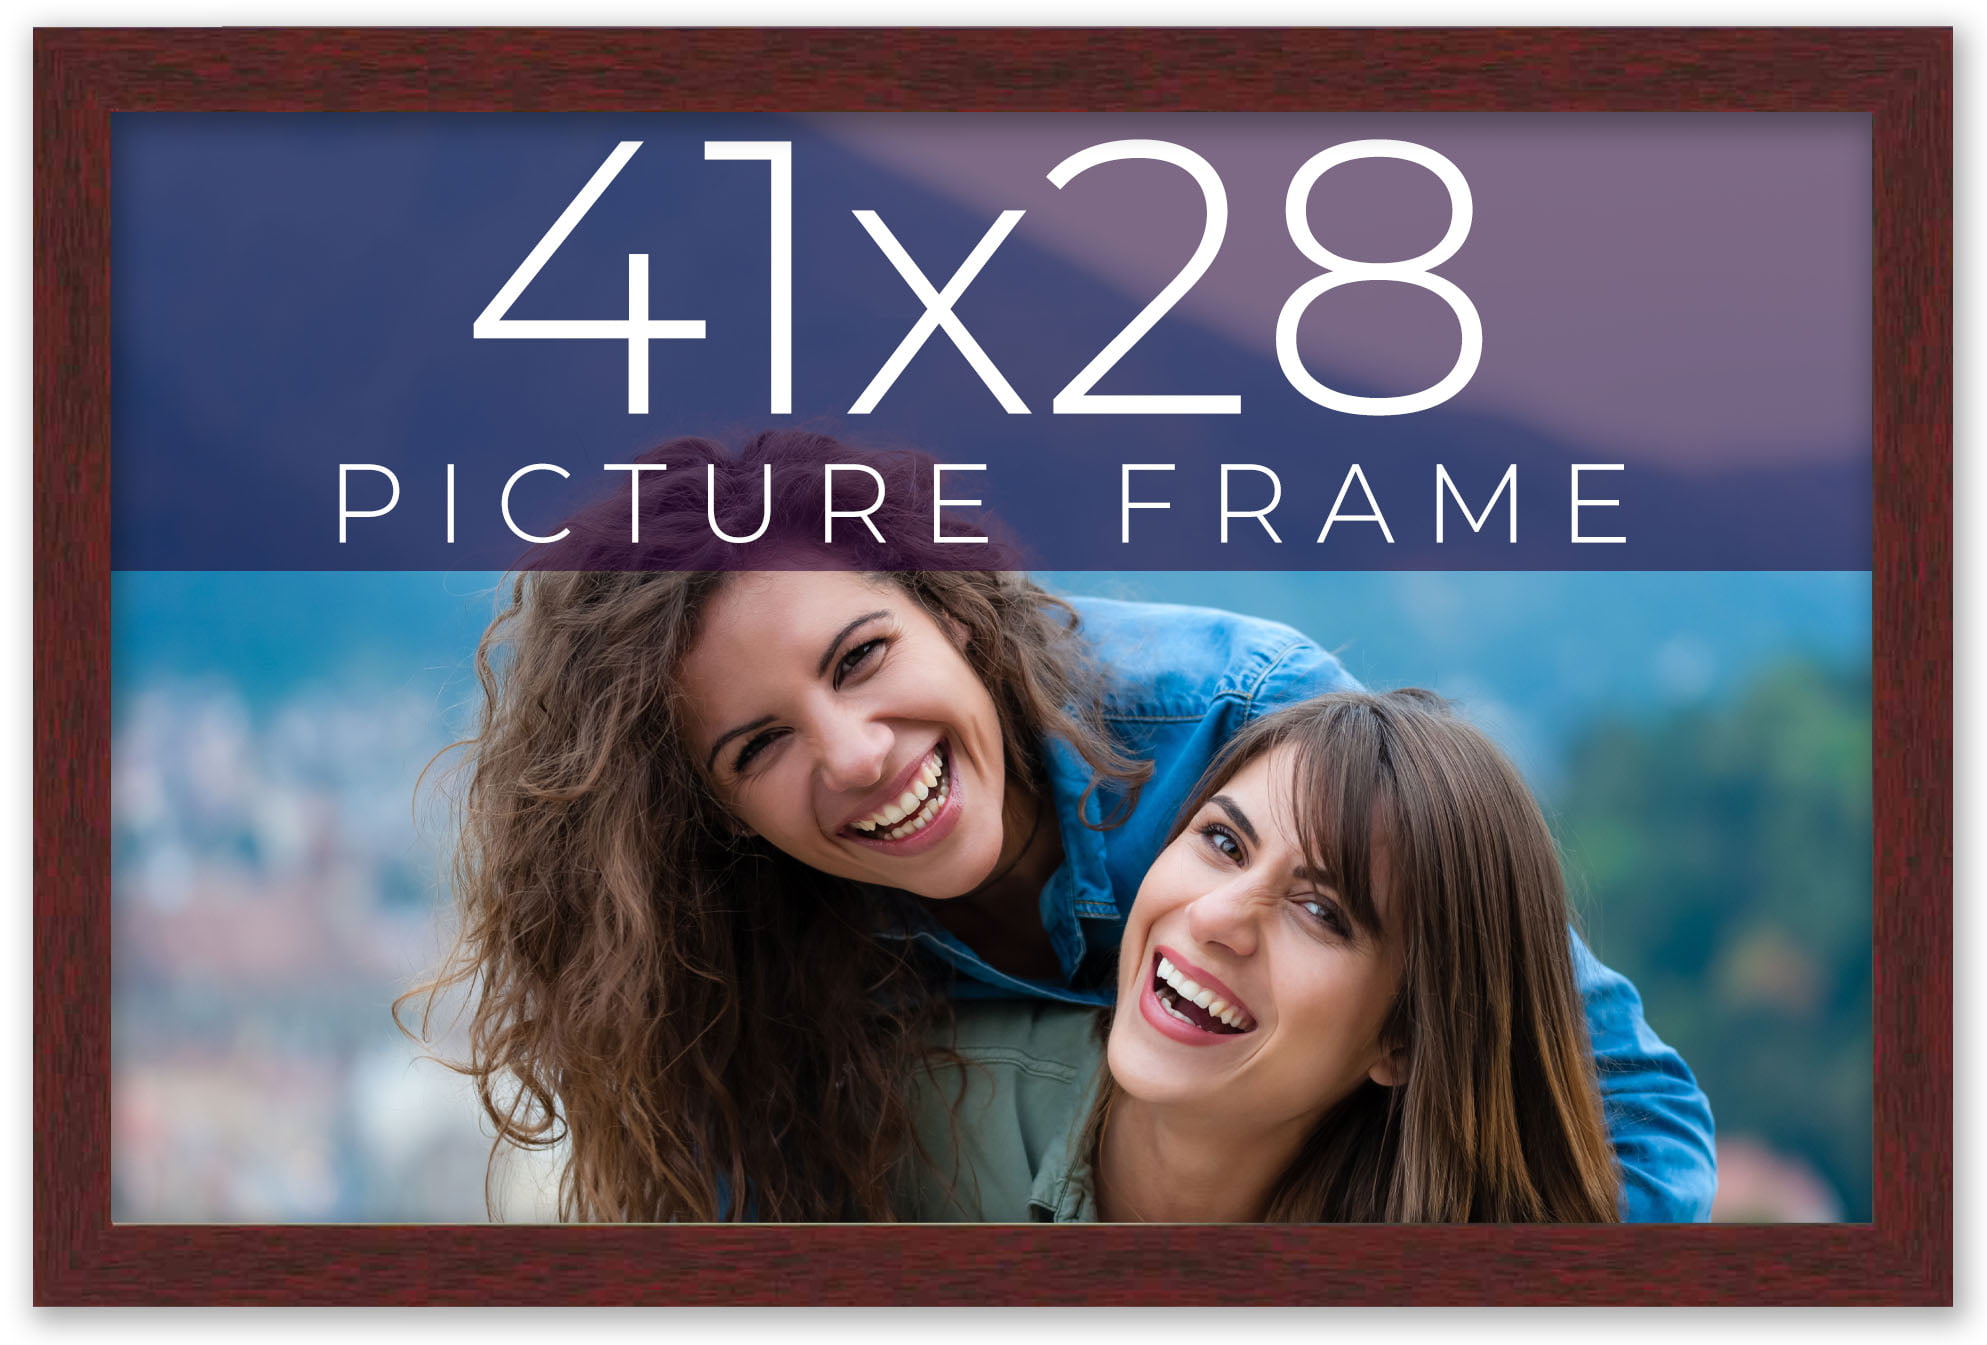  30x30 Honey Brown Real Wood Picture Frame Width 0.75 Inches, Interior Frame Depth 0.5 Inches